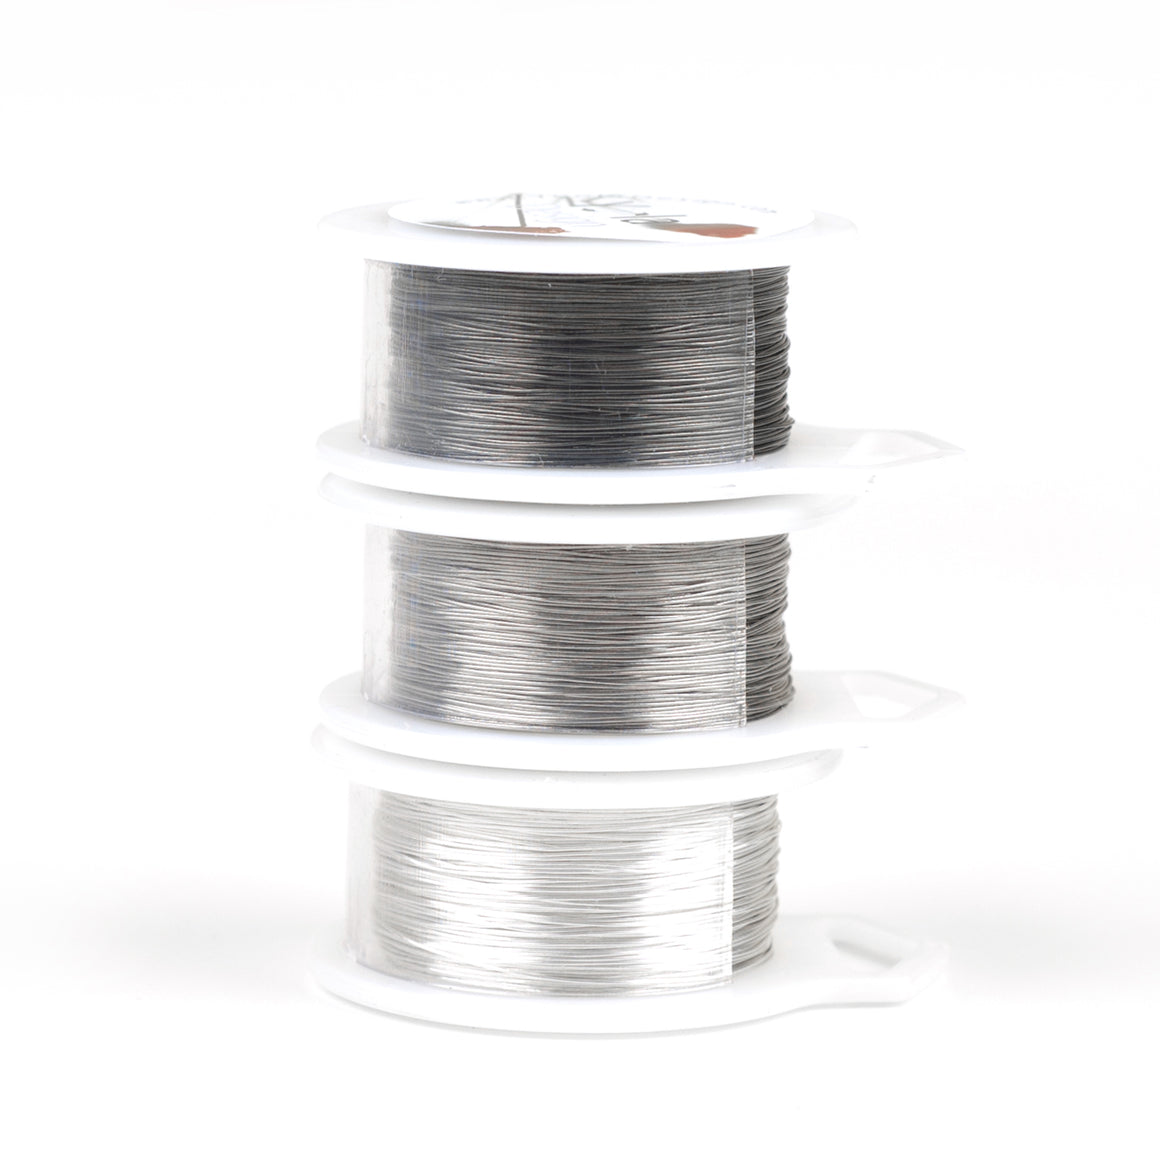 Gray Craft Wires - Silver, Steel gray and Ash gray - 120 feet each - Yooladesign